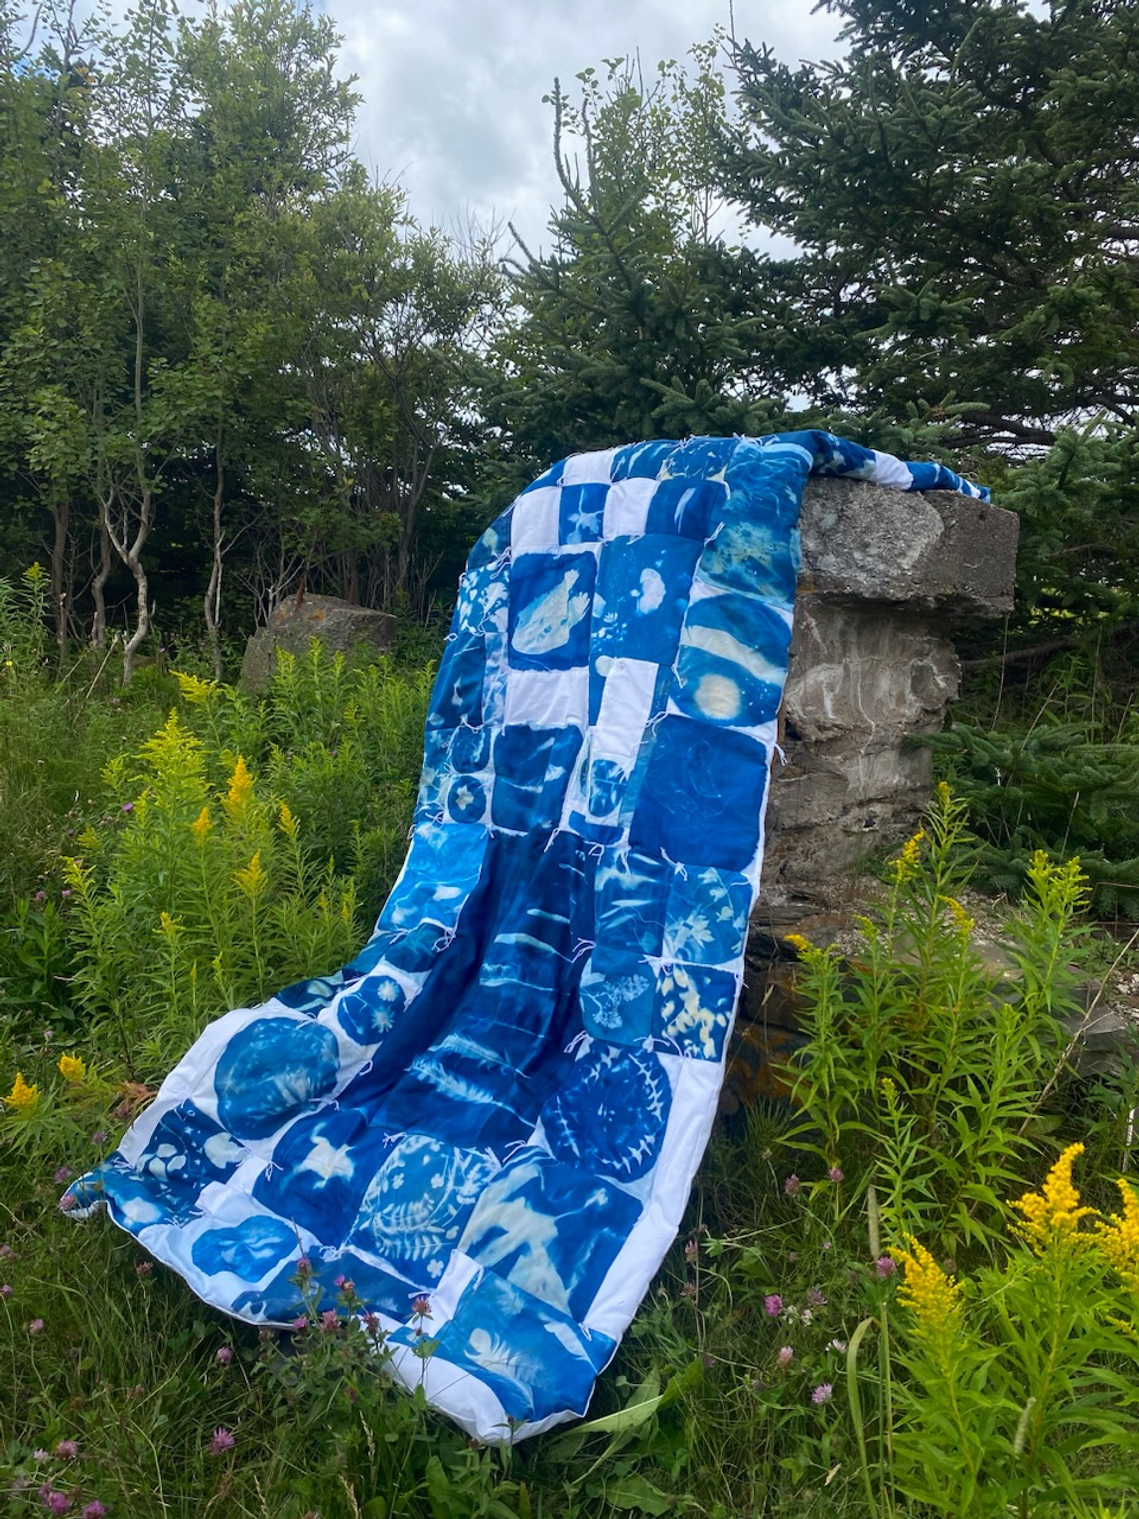 Donica's quilt, made of cyanotype prints, is draped over the ruin of an old stone fence. Forest greenery and goldenrod surround the quilt as its blue fabric shows up in vibrant contrast. There are many patches on the quilt with various prints.